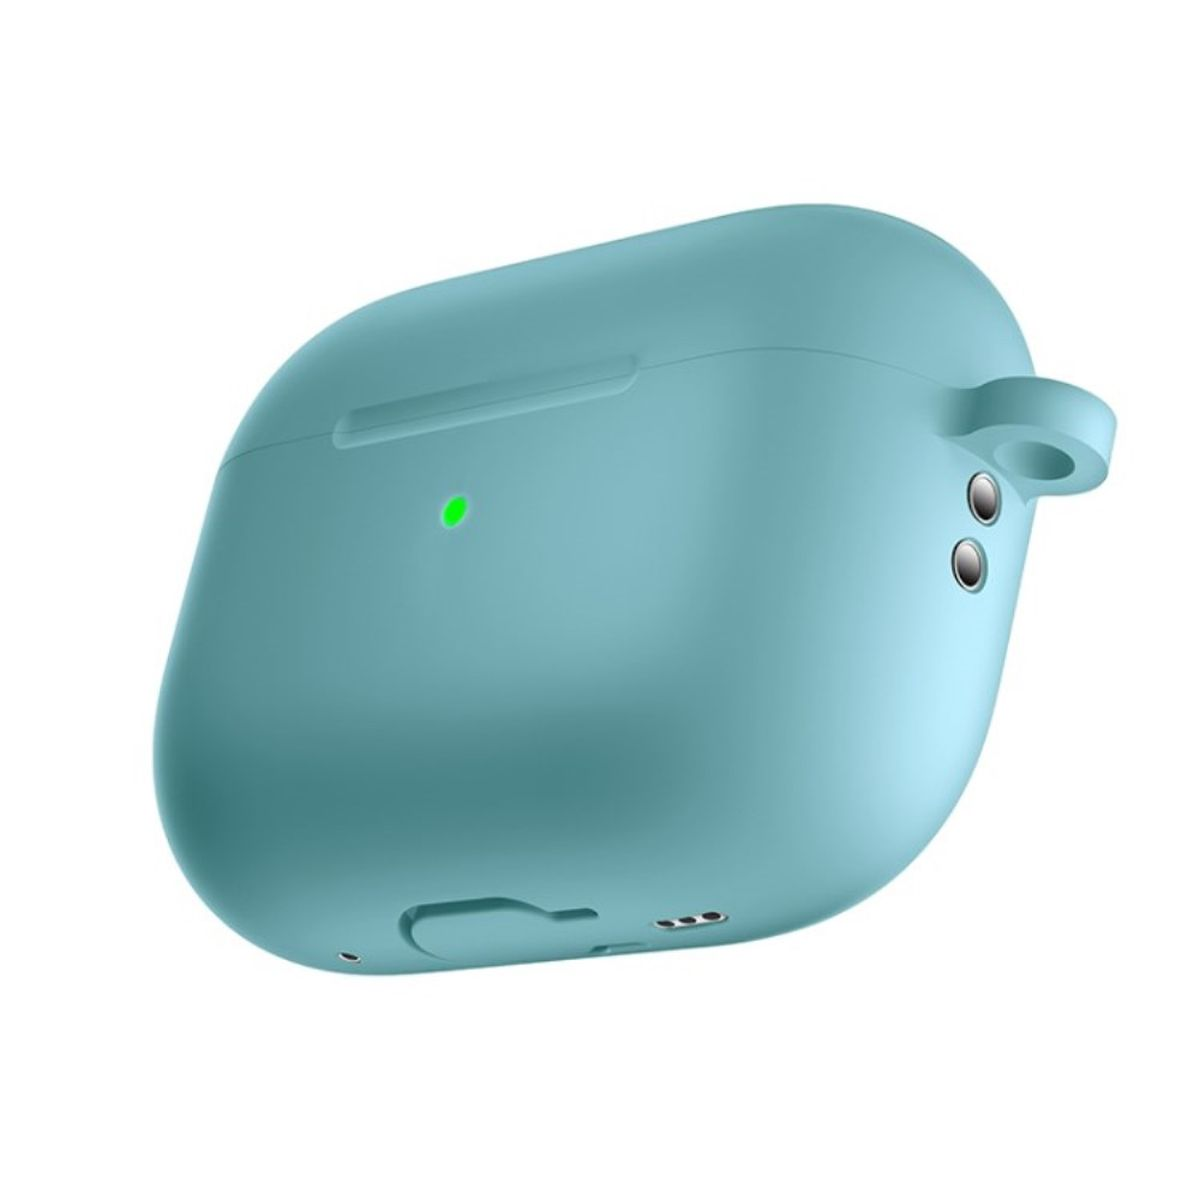 COVERKINGZ Silikoncover Ladecase für 2 77380 mint, Apple Airpods Pro Unisex